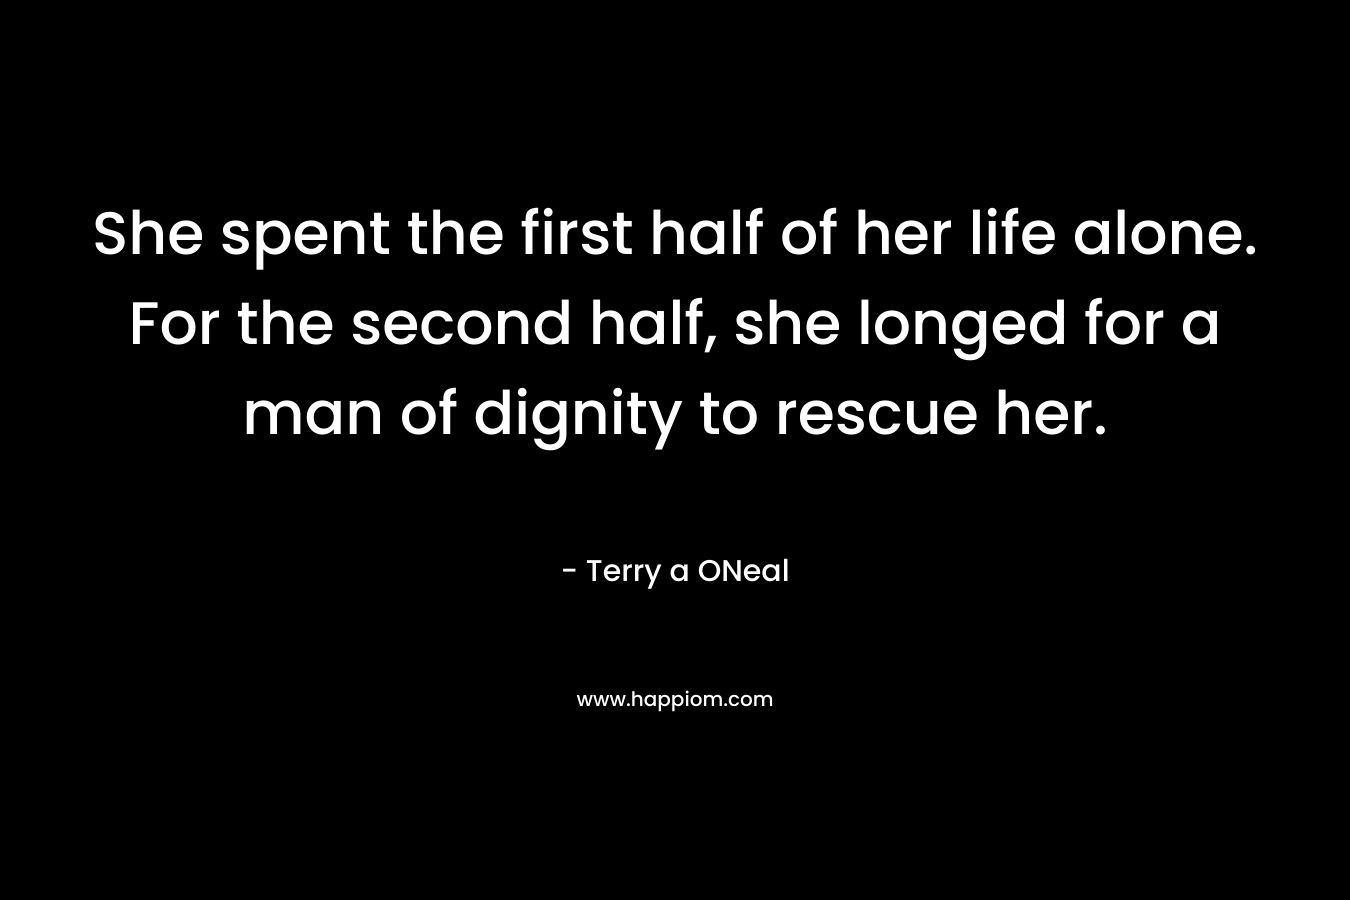 She spent the first half of her life alone. For the second half, she longed for a man of dignity to rescue her. – Terry a ONeal